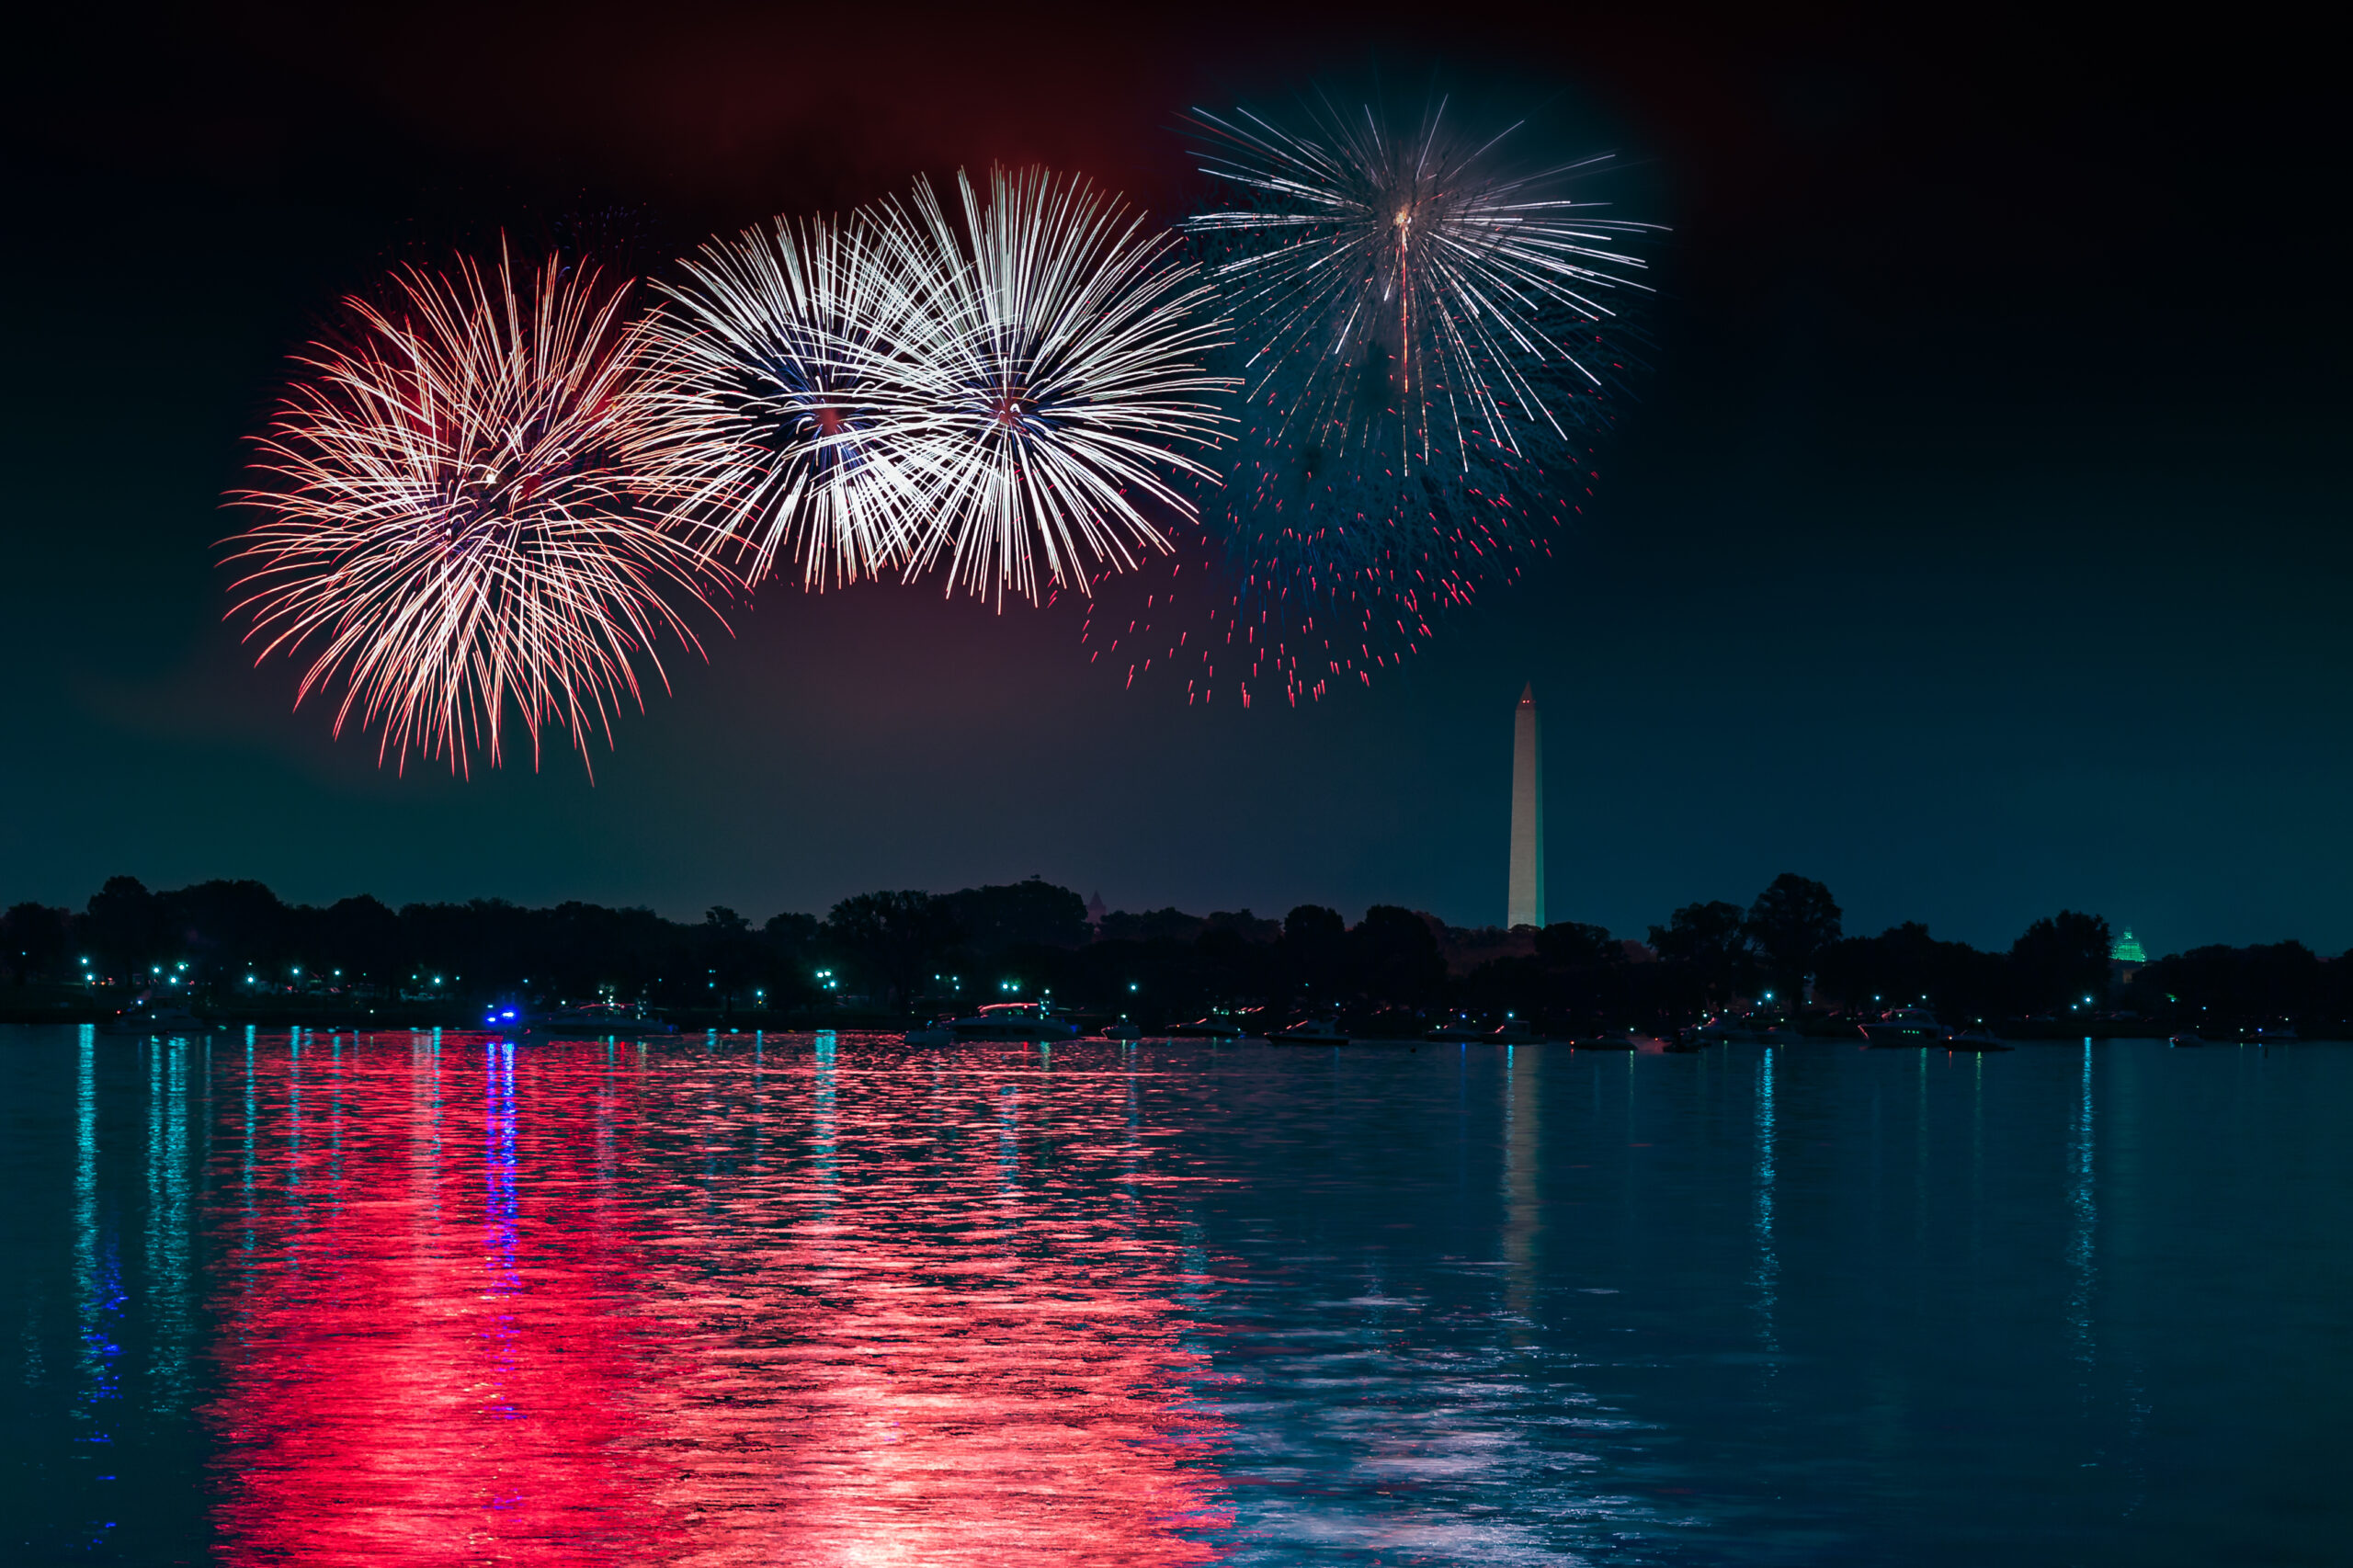 How to Spend Independence Day in Washington, D.C.